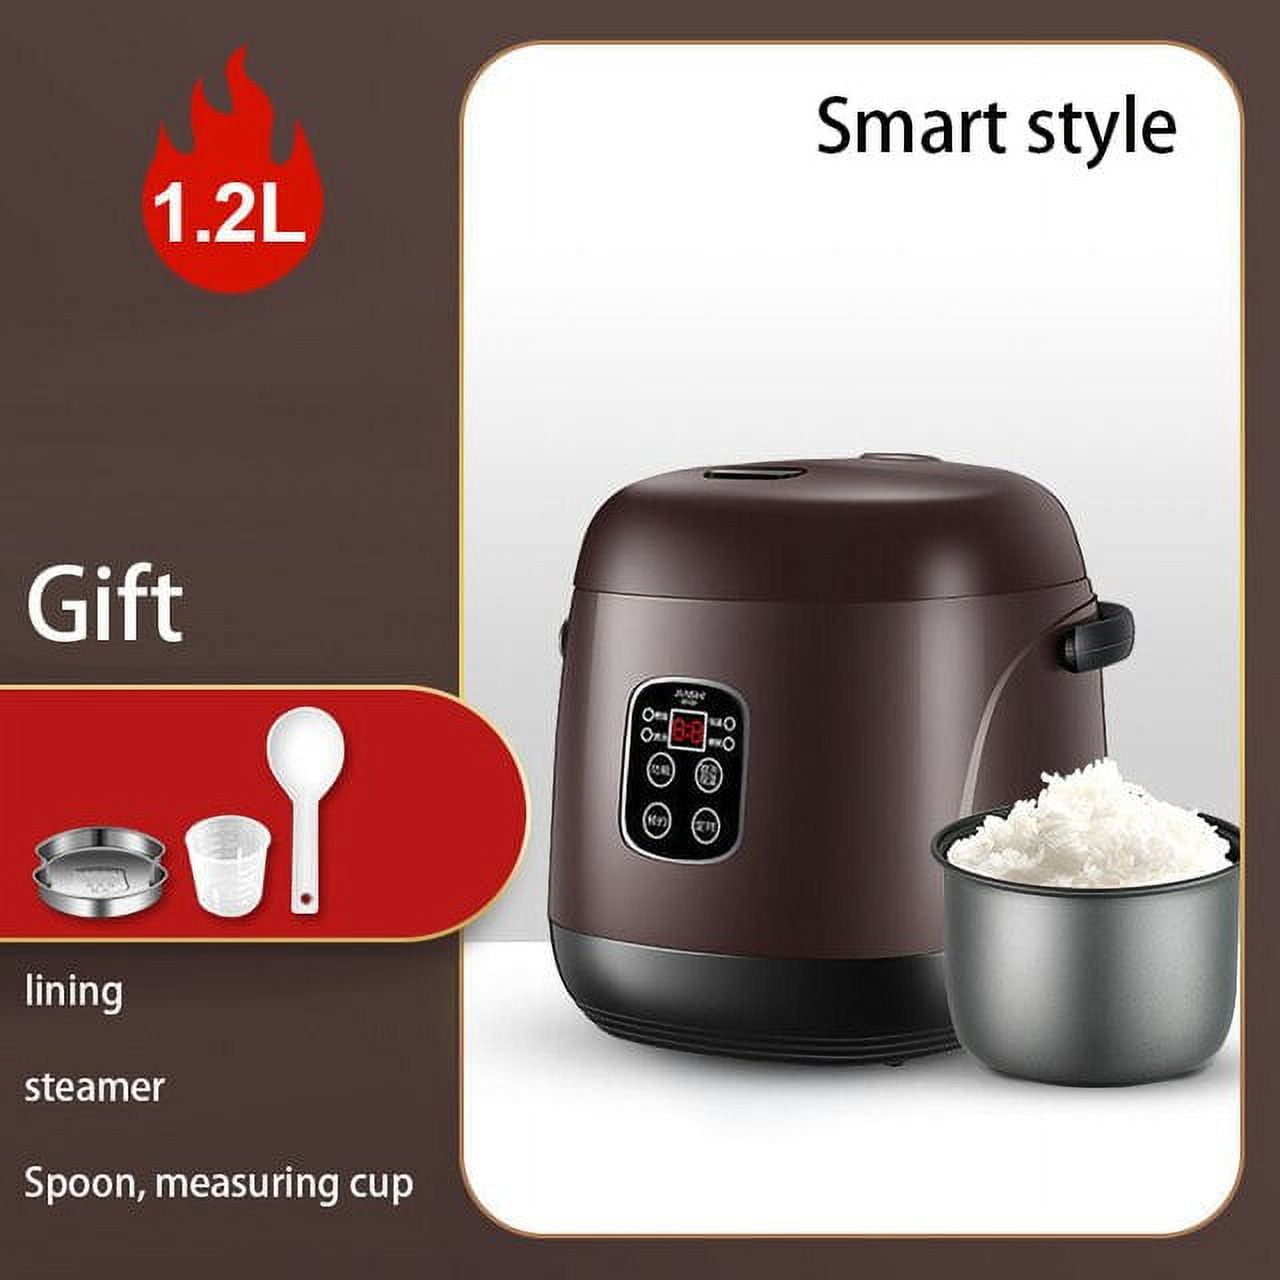  Rice Cooker, Household, 1.3L-250W, Mini Rice Cooker